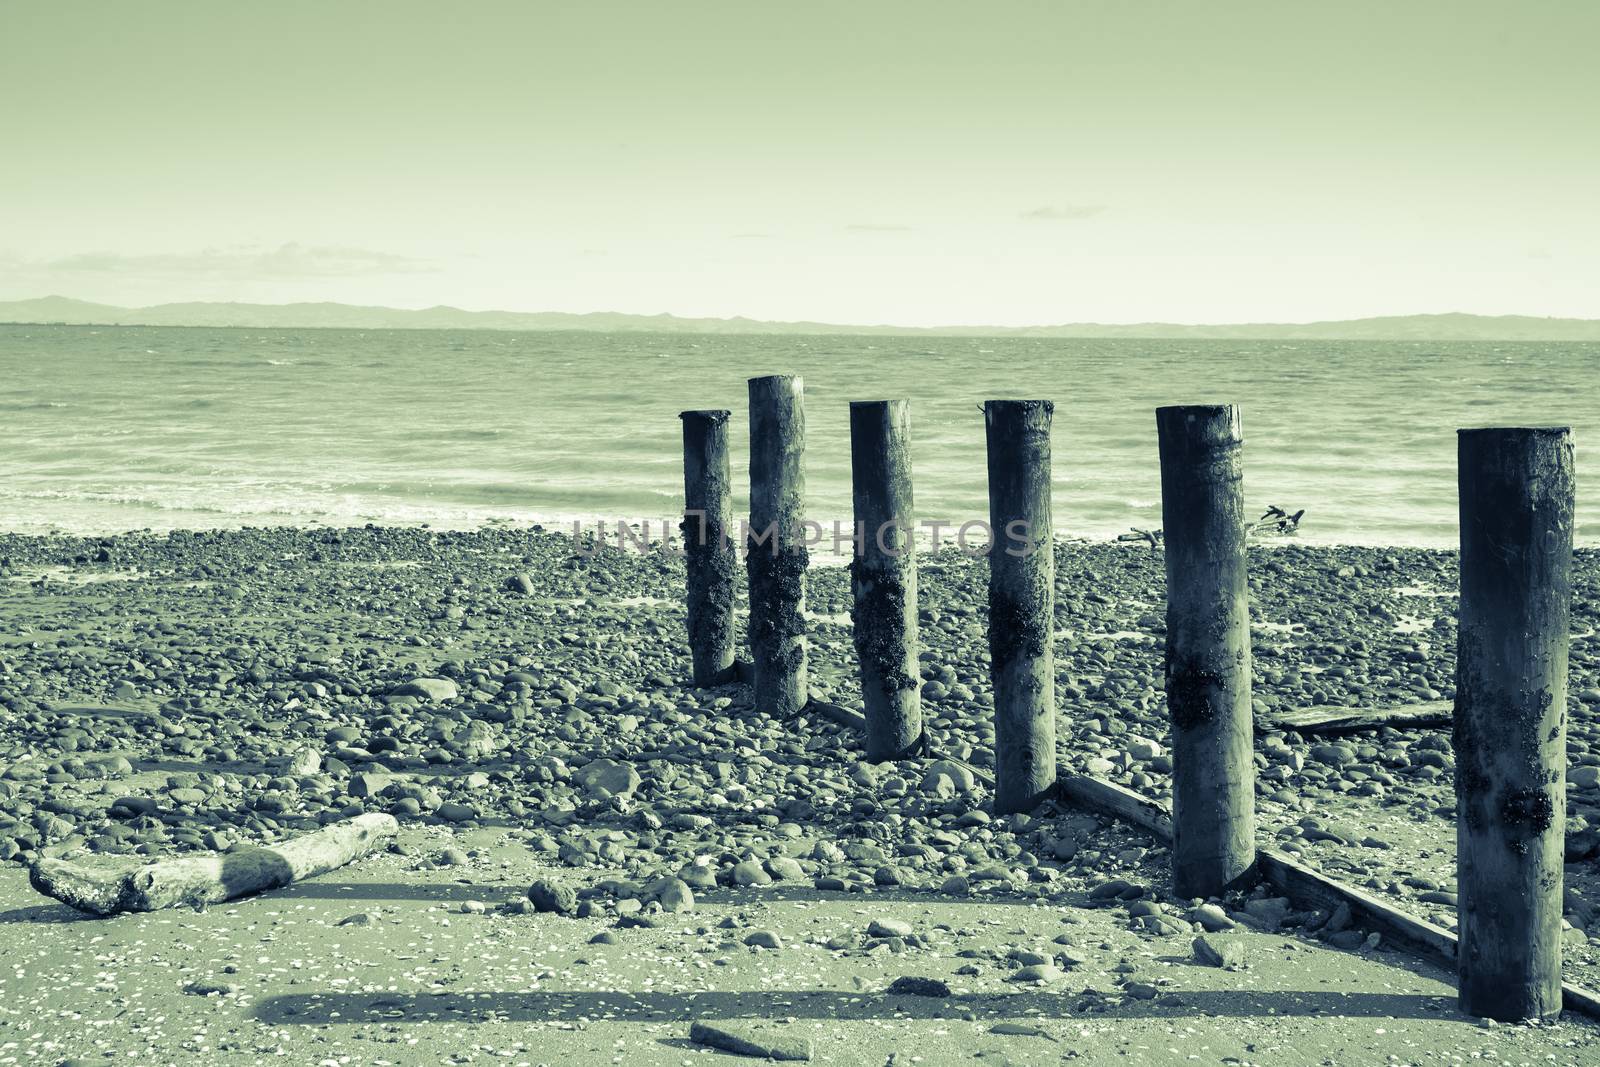 A cool overcast day at Tararu Beach, Thames, Coromandel, old jetty piles at low tide. Old fashioned or retro style image.